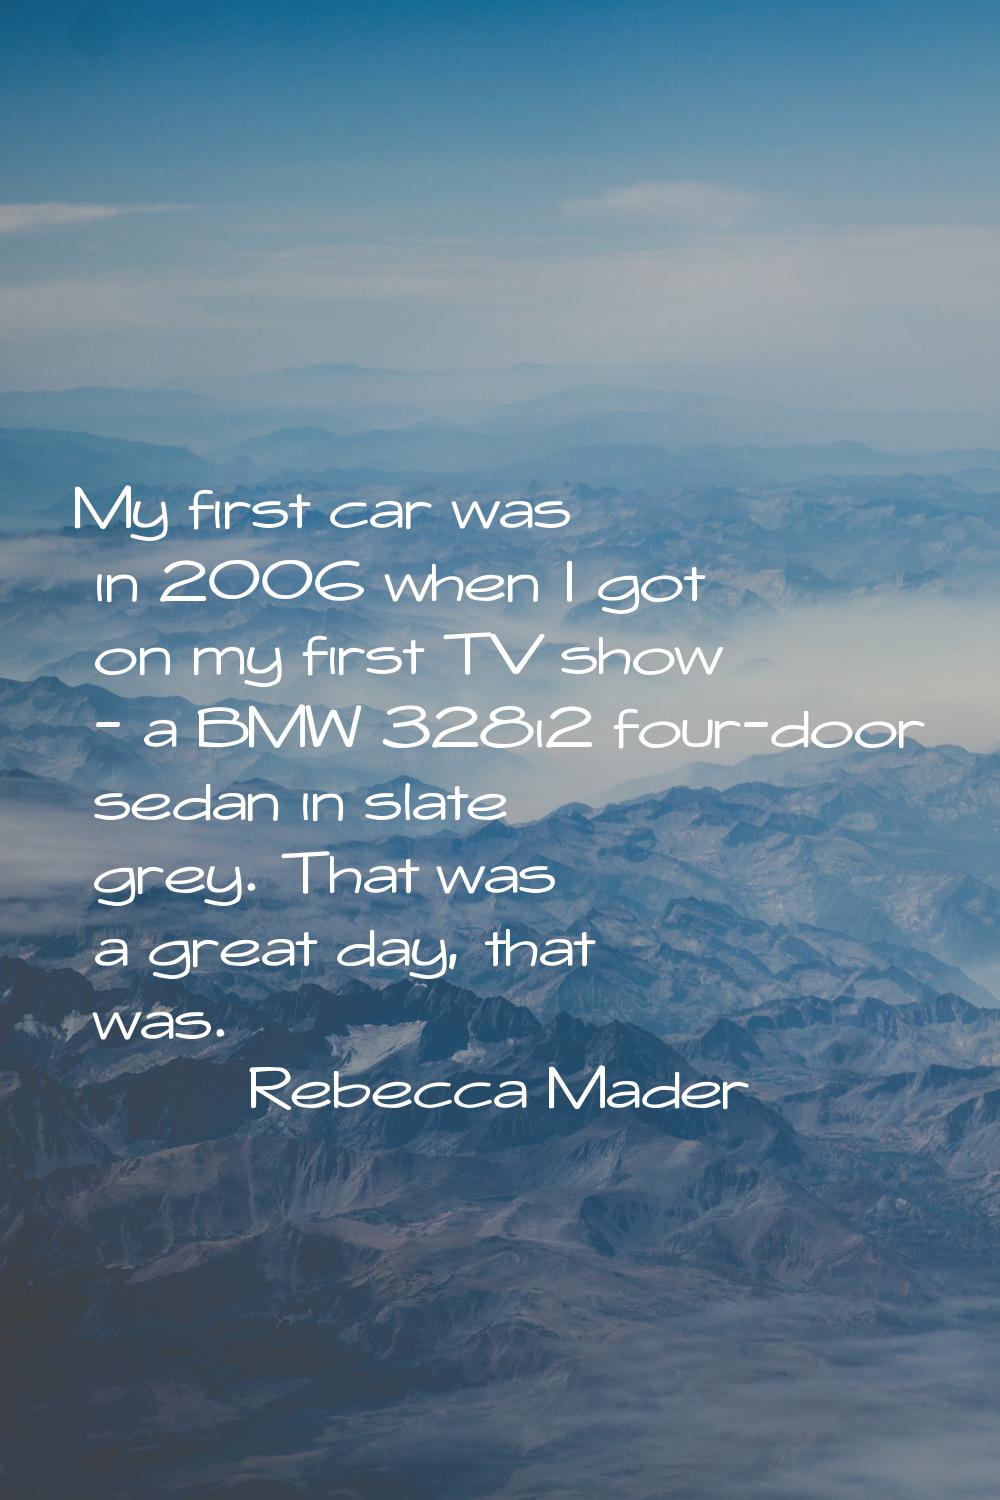 My first car was in 2006 when I got on my first TV show - a BMW 328i2 four-door sedan in slate grey